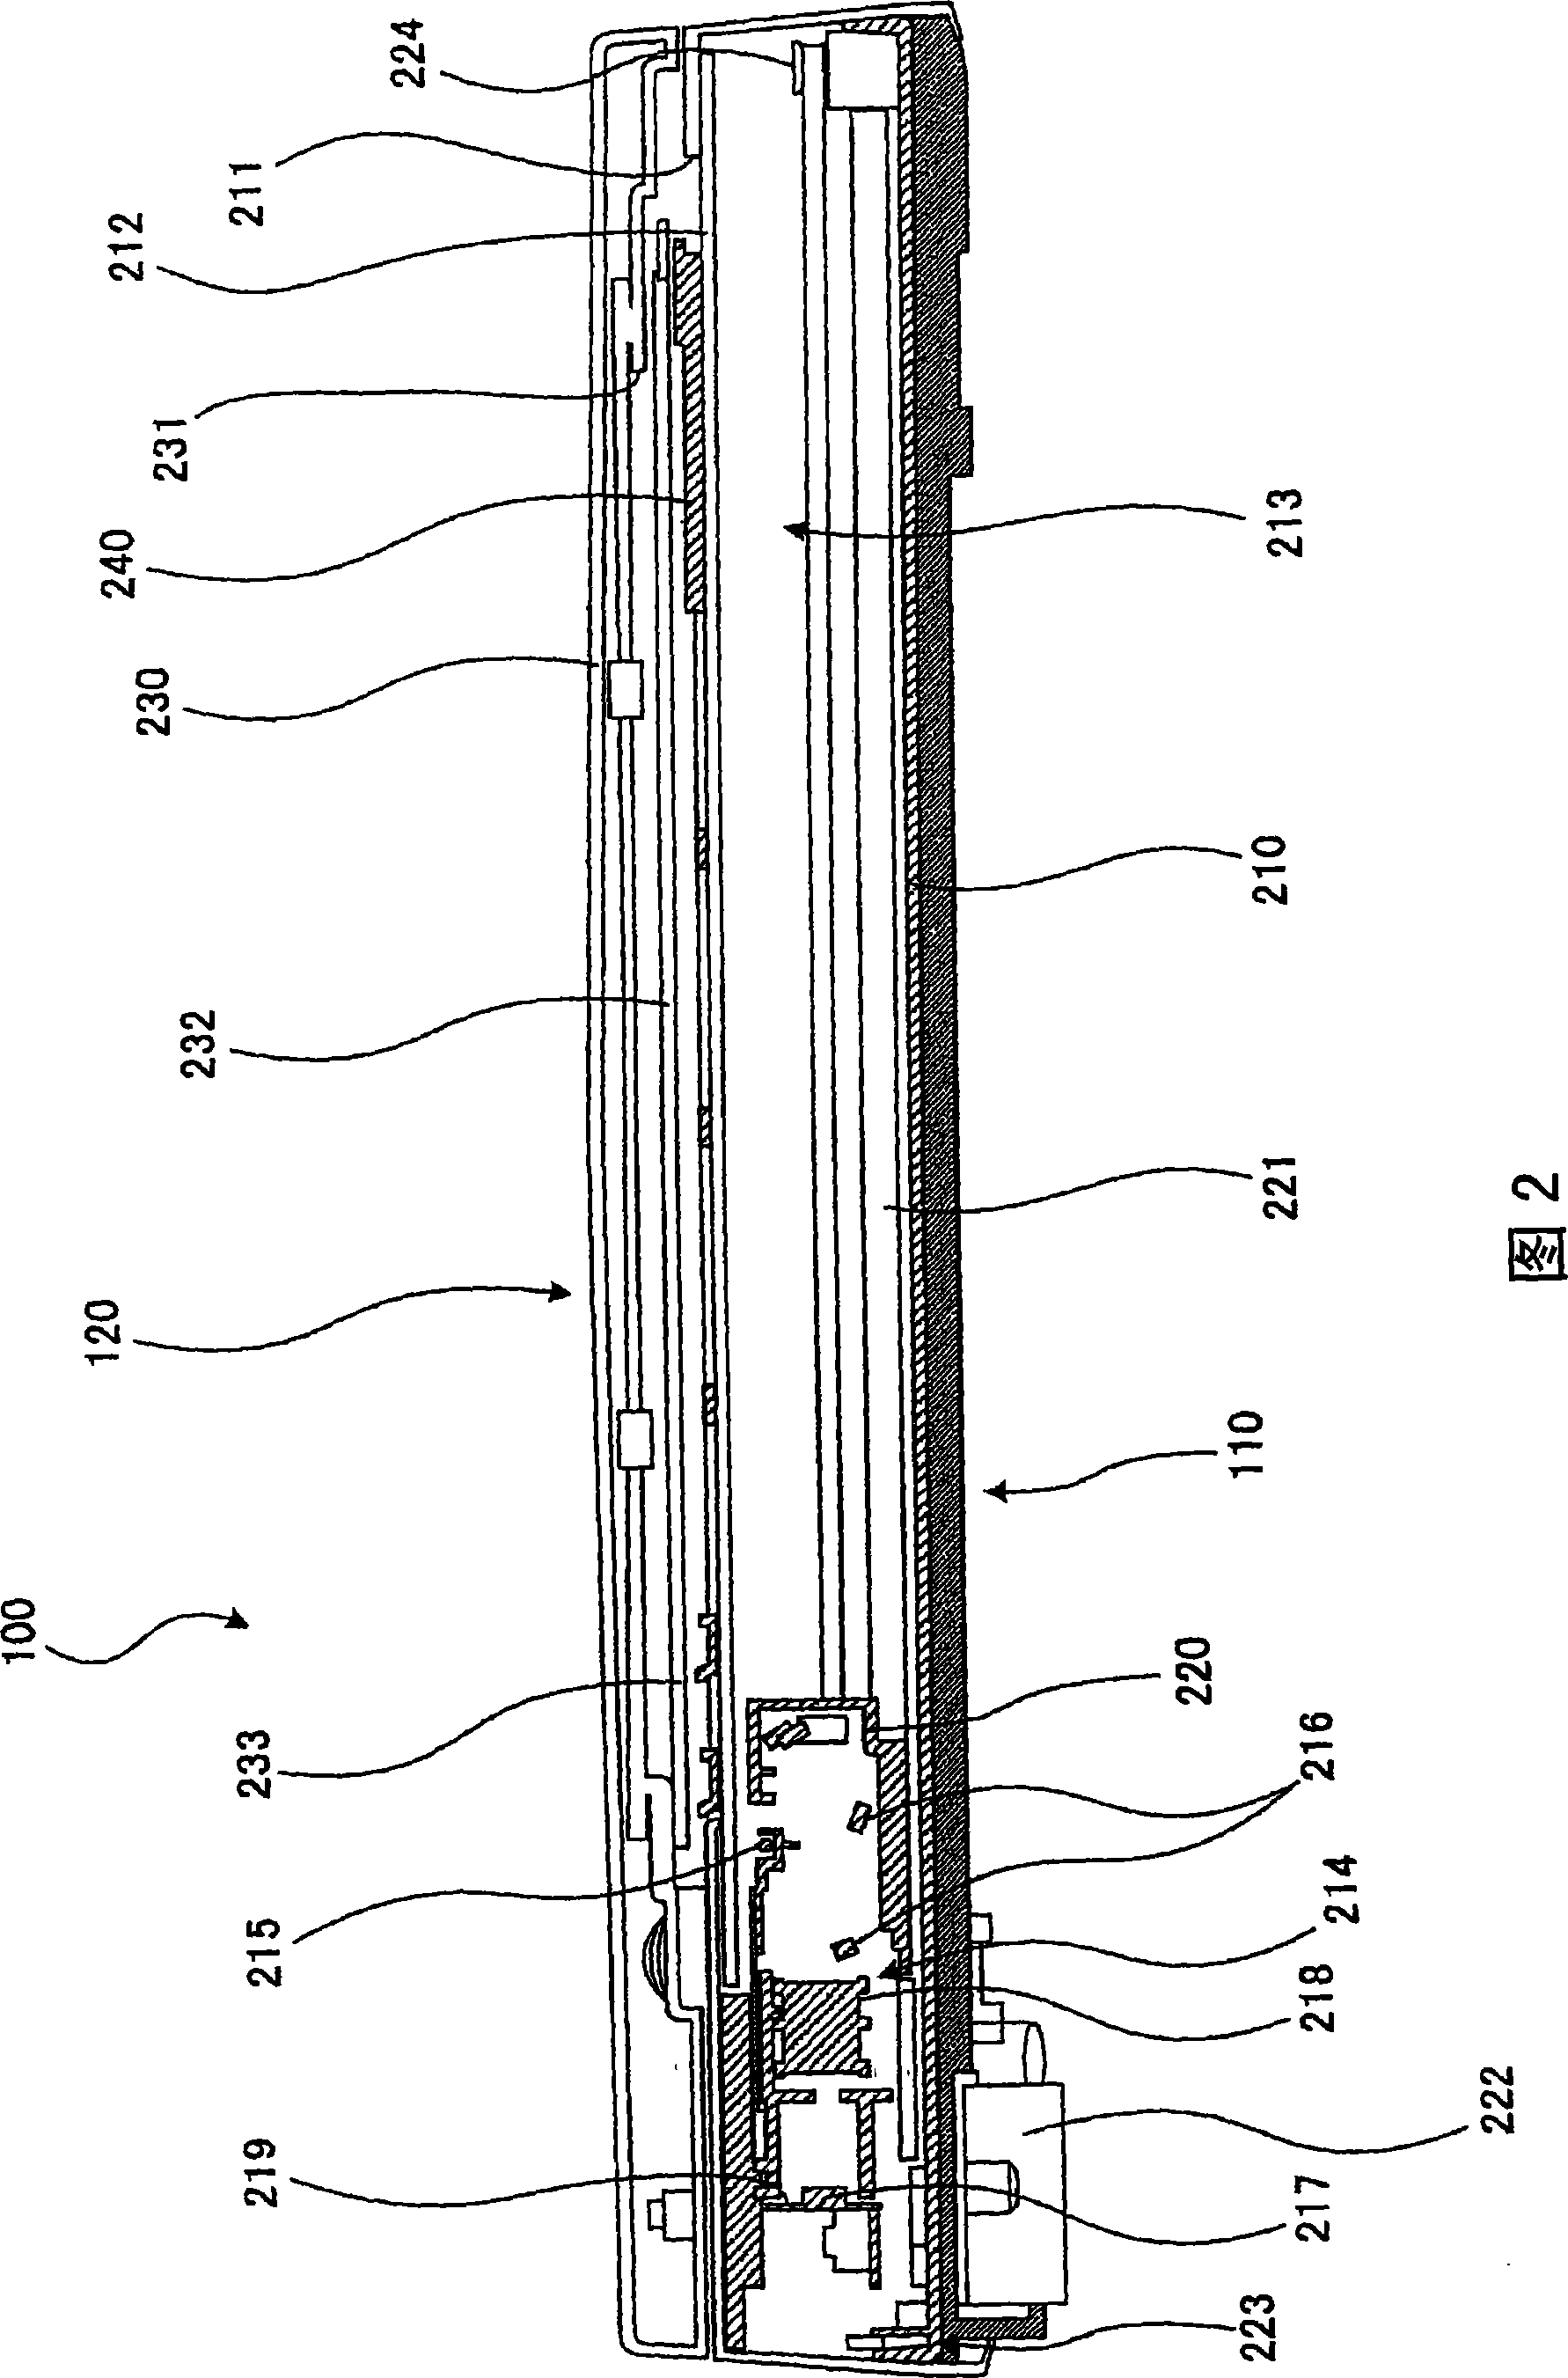 Image reading apparatus and multi-function machine